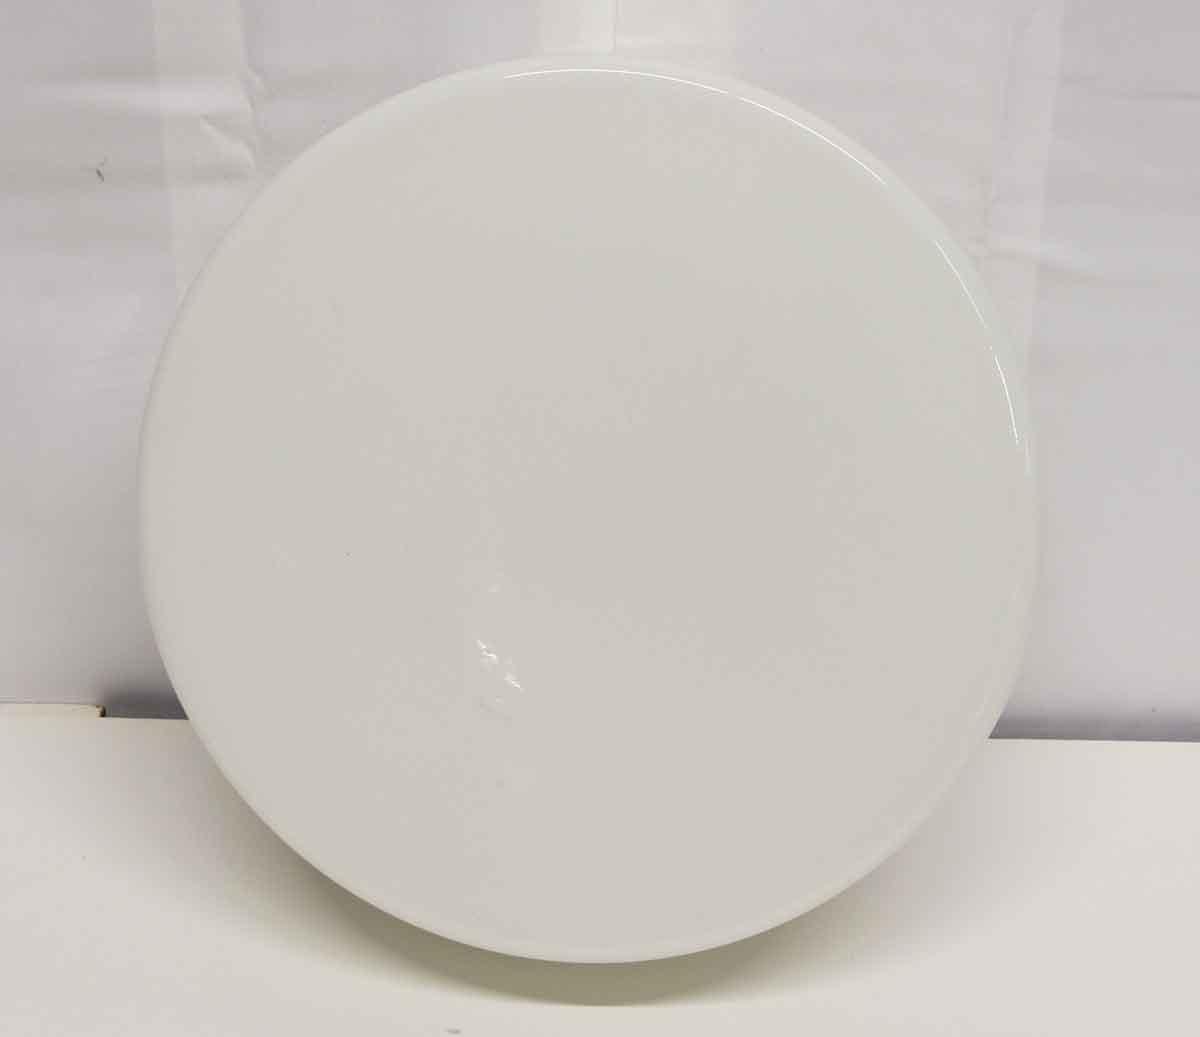 Round white 1990s Mid-Century Modern style French opaline glass flush mount fixture with a white steel base. Small quantity available at time of posting. Please inquire. Priced each. Small quantity available at time of posting. Please inquire.